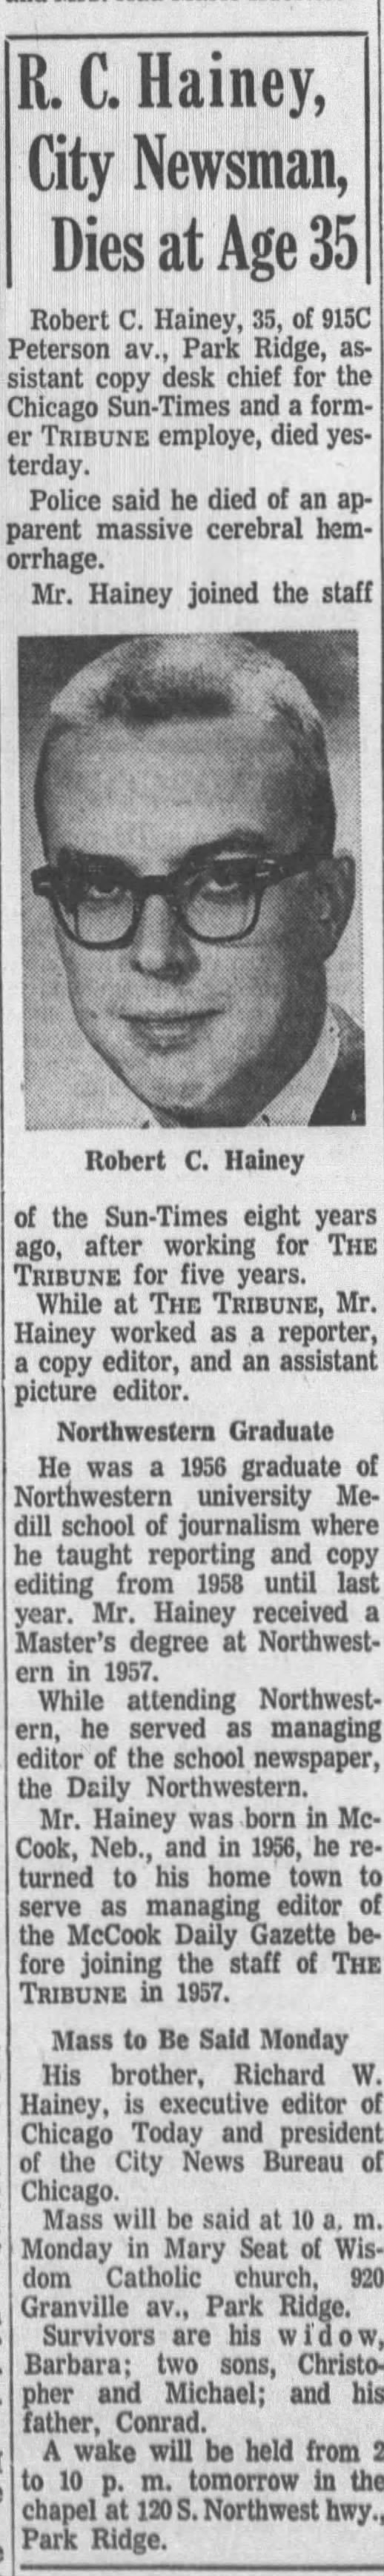 Obituary for R. C. Hainey